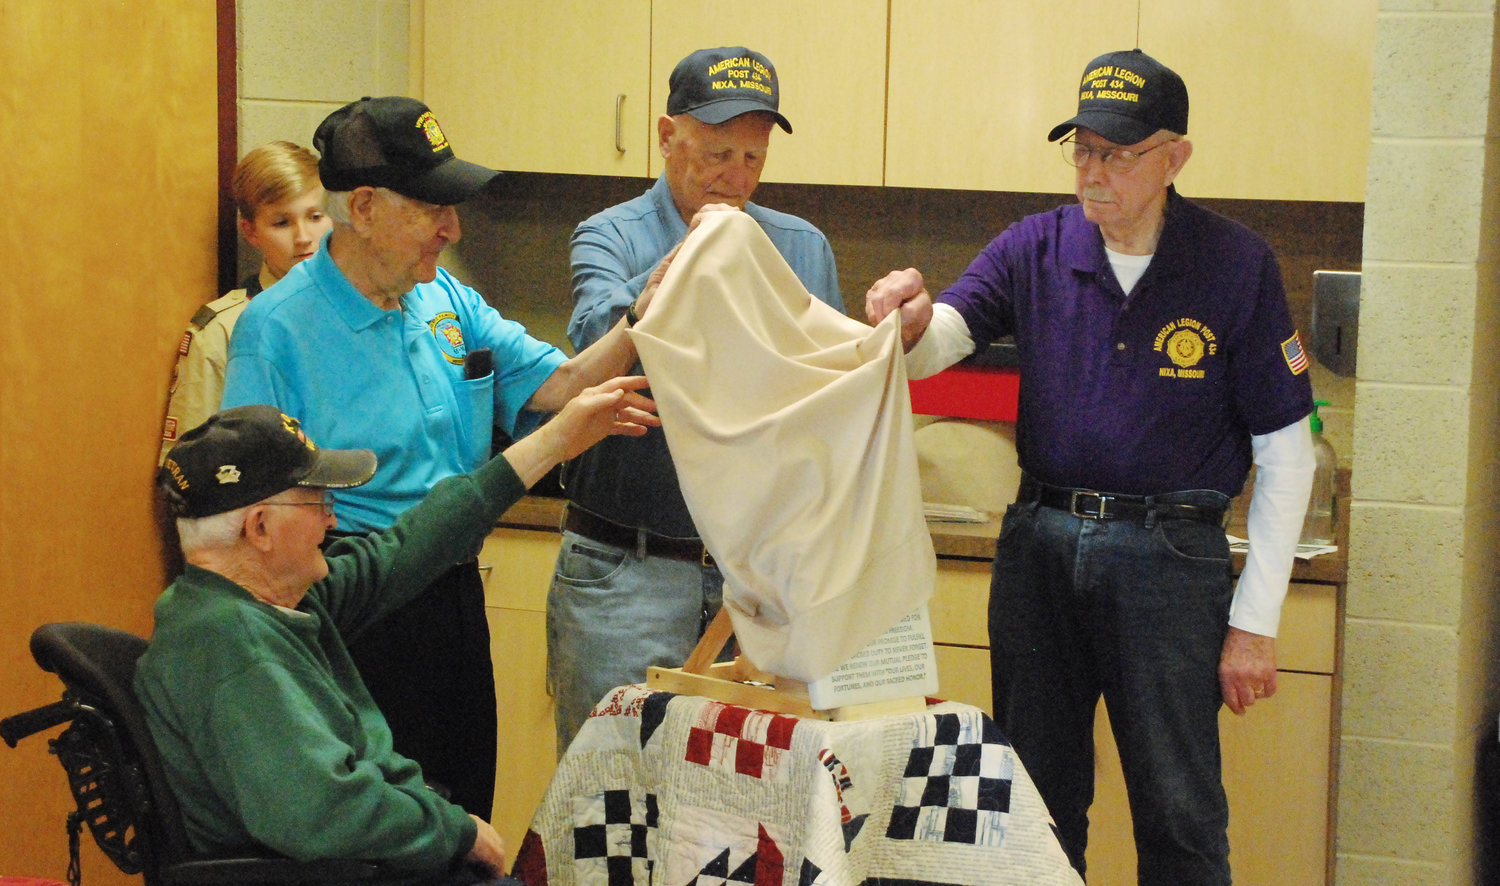 FOUR KOREAN WAR VETERANS unveil a monument for unknown and unidentified soldiers that will be placed at the Veterans Memorial at the Nixa Community Center. The unveiling took place as part of Veterans Day ceremonies at the X Center on Nov. 13, 2021.